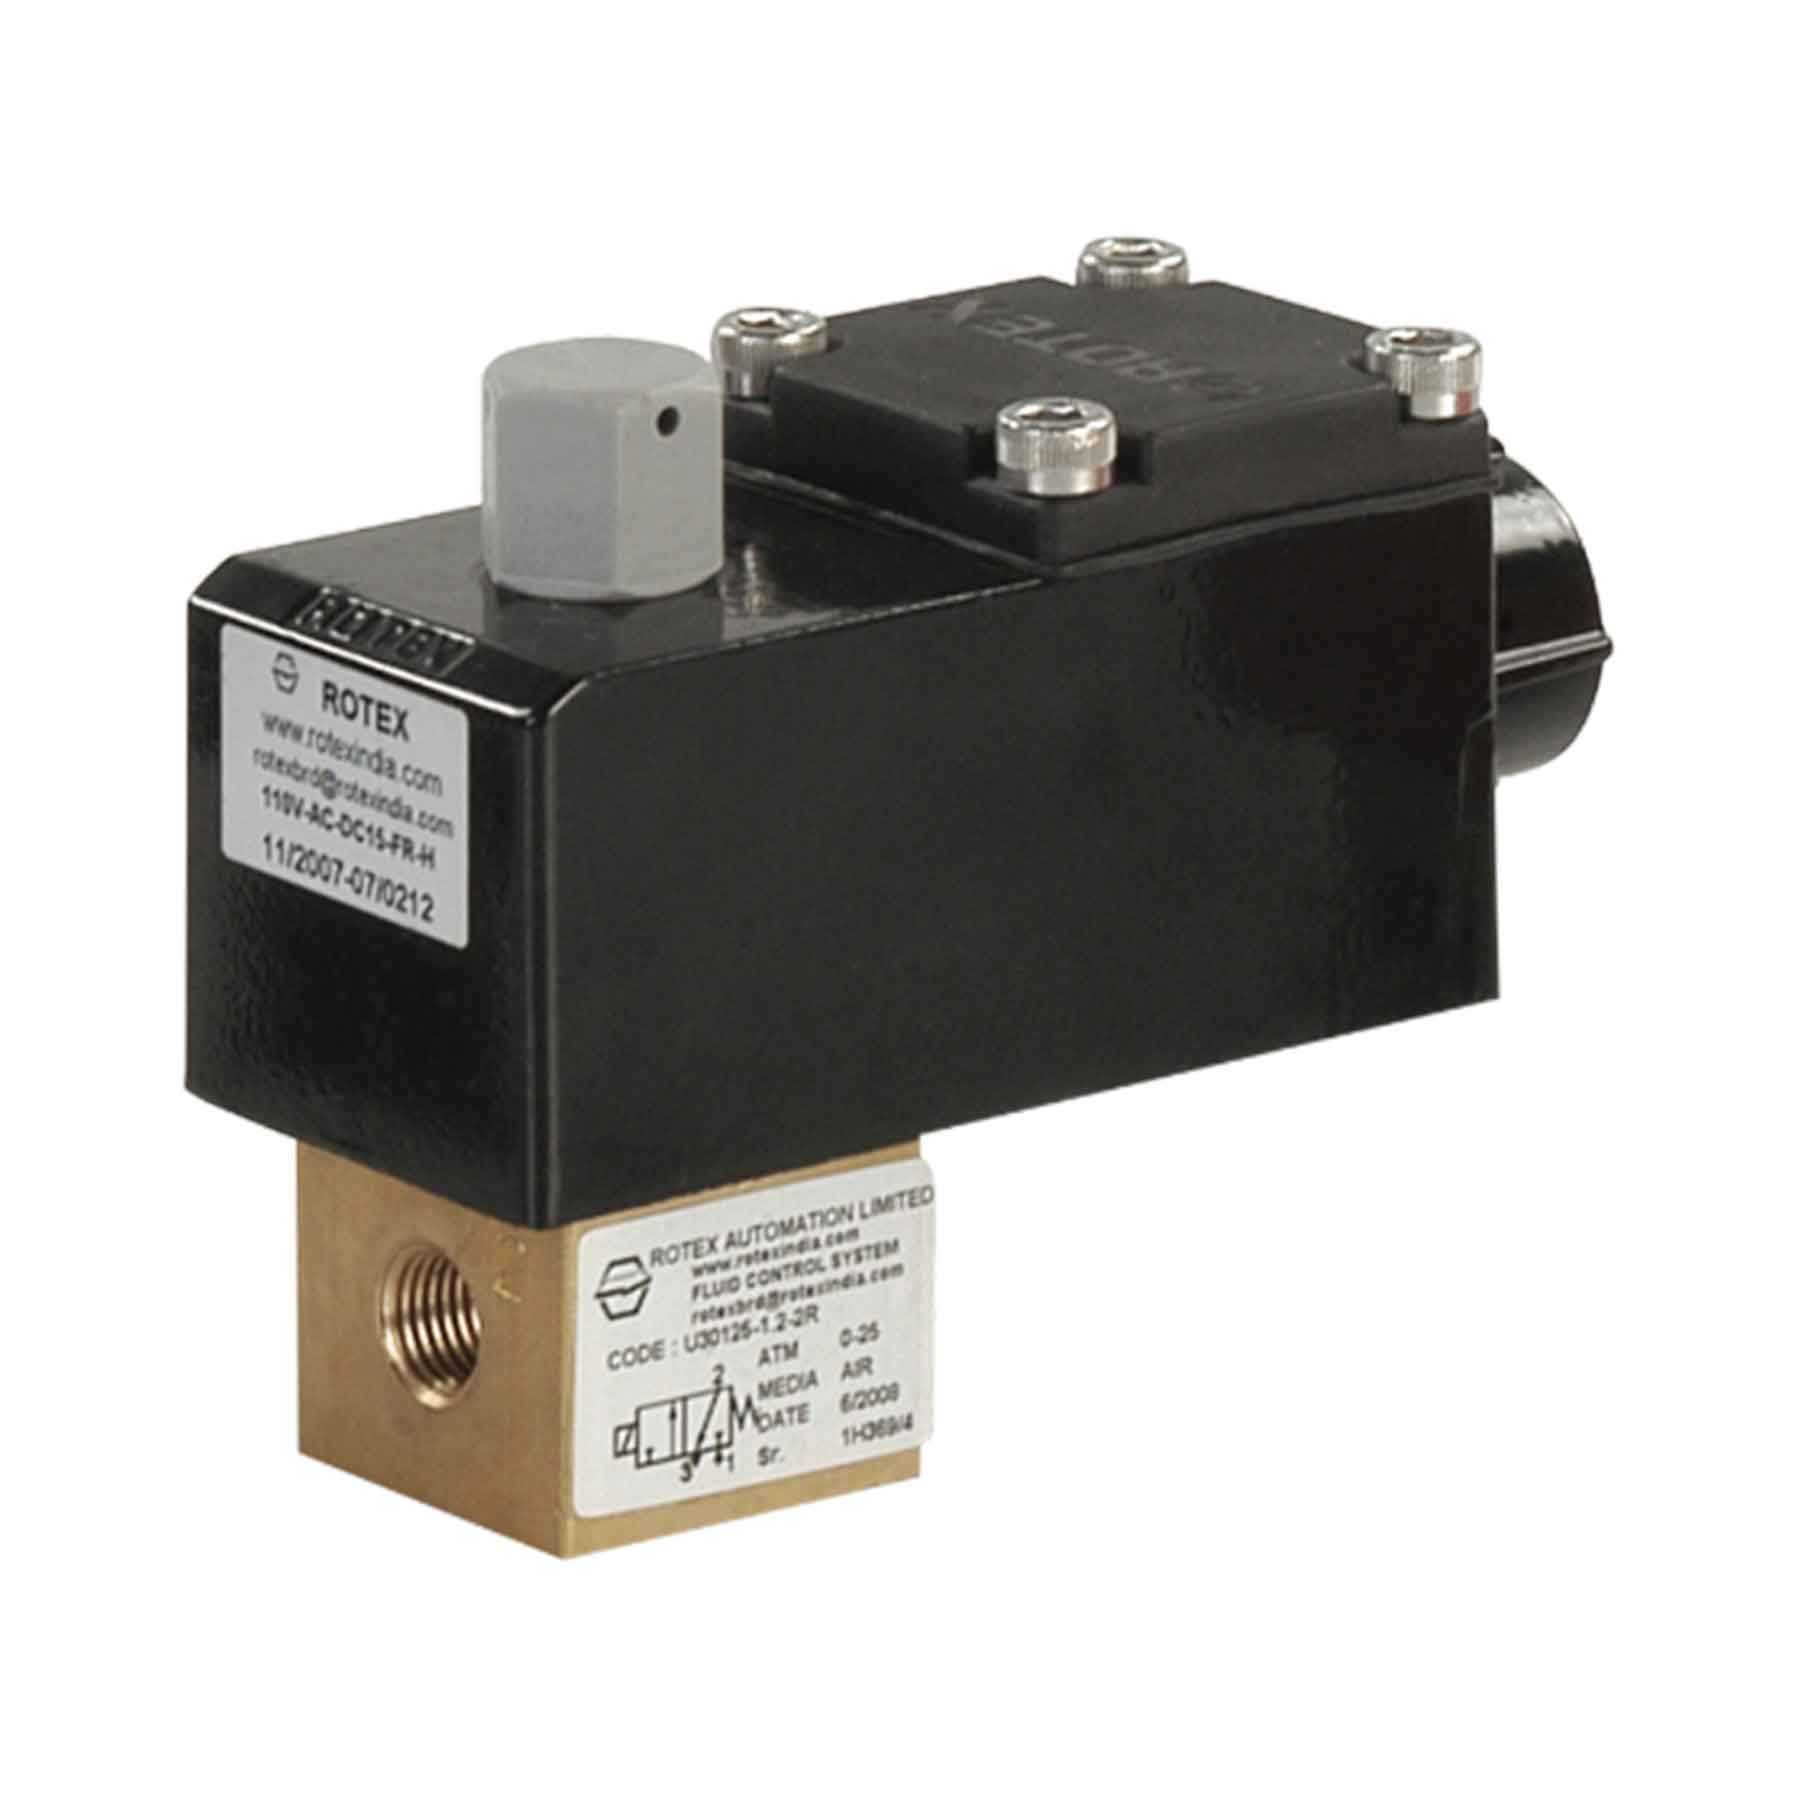 Rotex 2/2-Way Normally Closed Direct Lift Solenoid Valve 20101-2.5-2R-B5+III-24V-DC-37--H-01